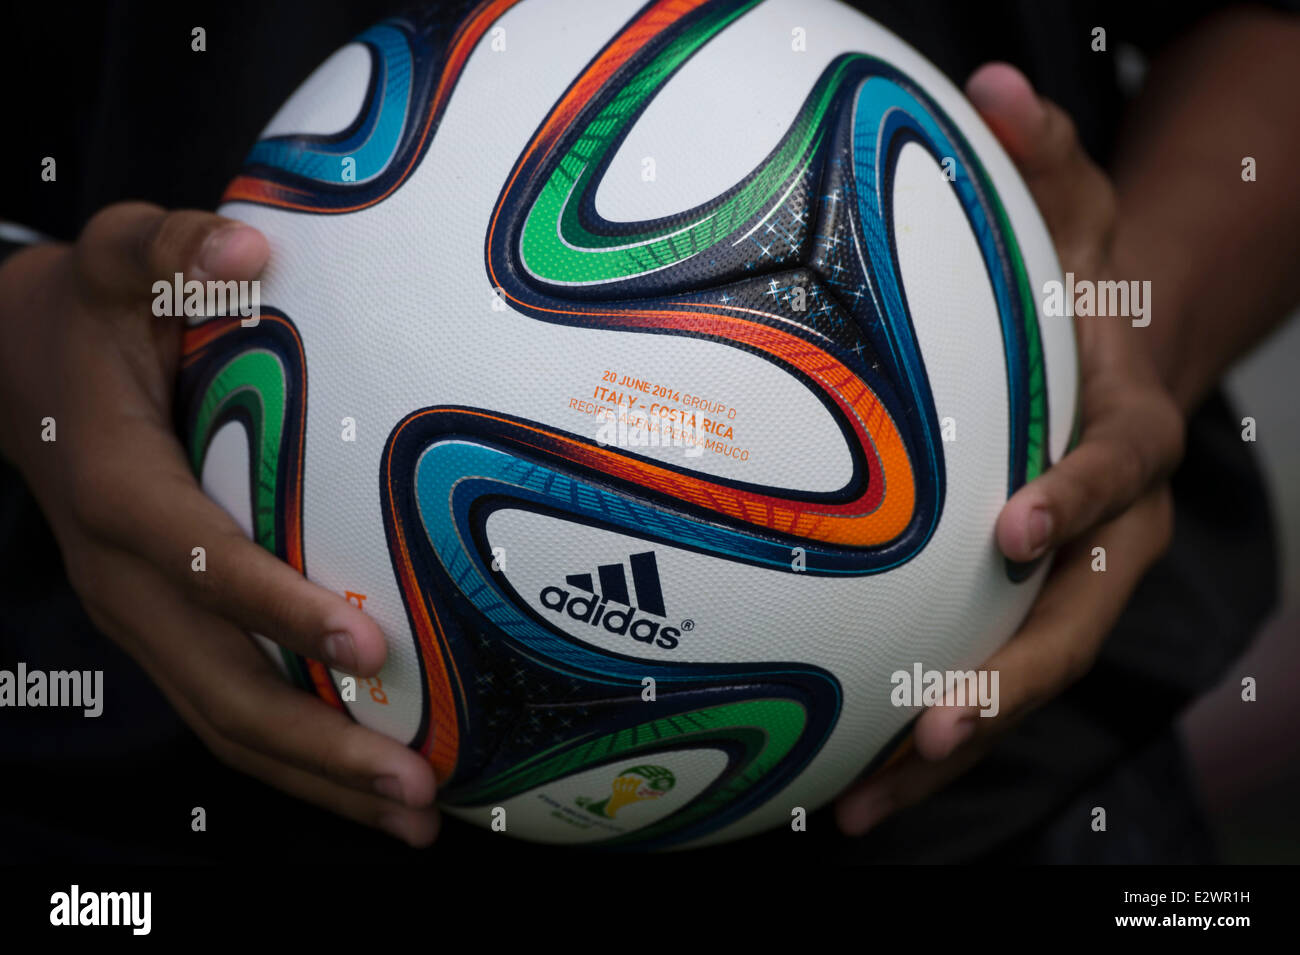 Isolated Brazuca Football For The Brazil Worldcup Final Stock Photo -  Download Image Now - iStock